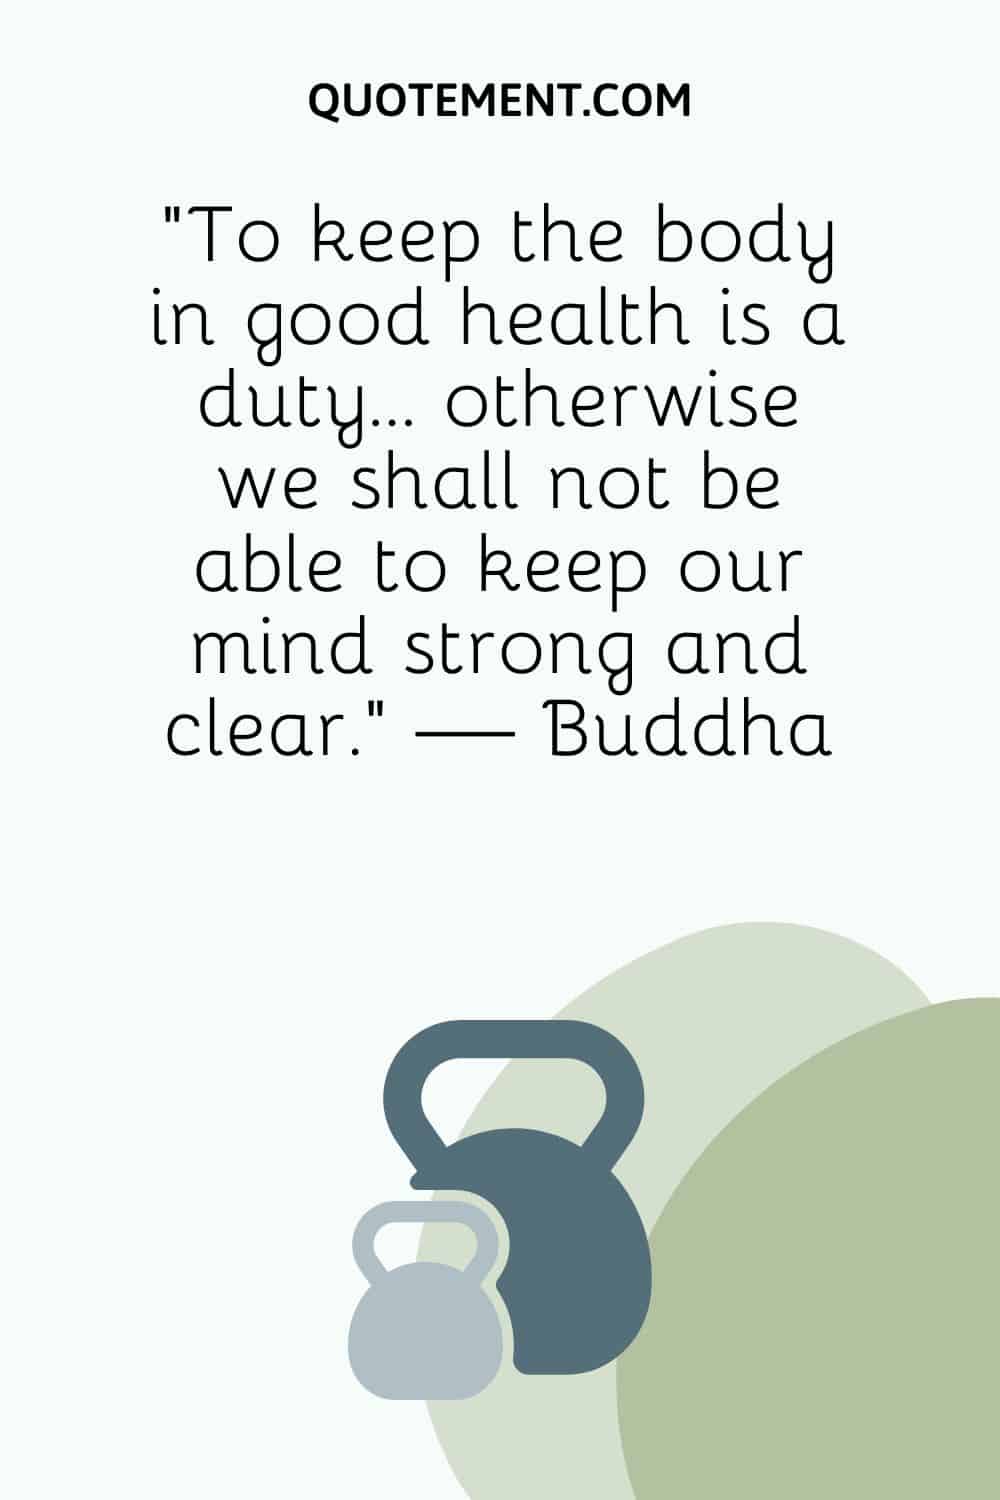 a pair of kettlebells image representing health fitness quote